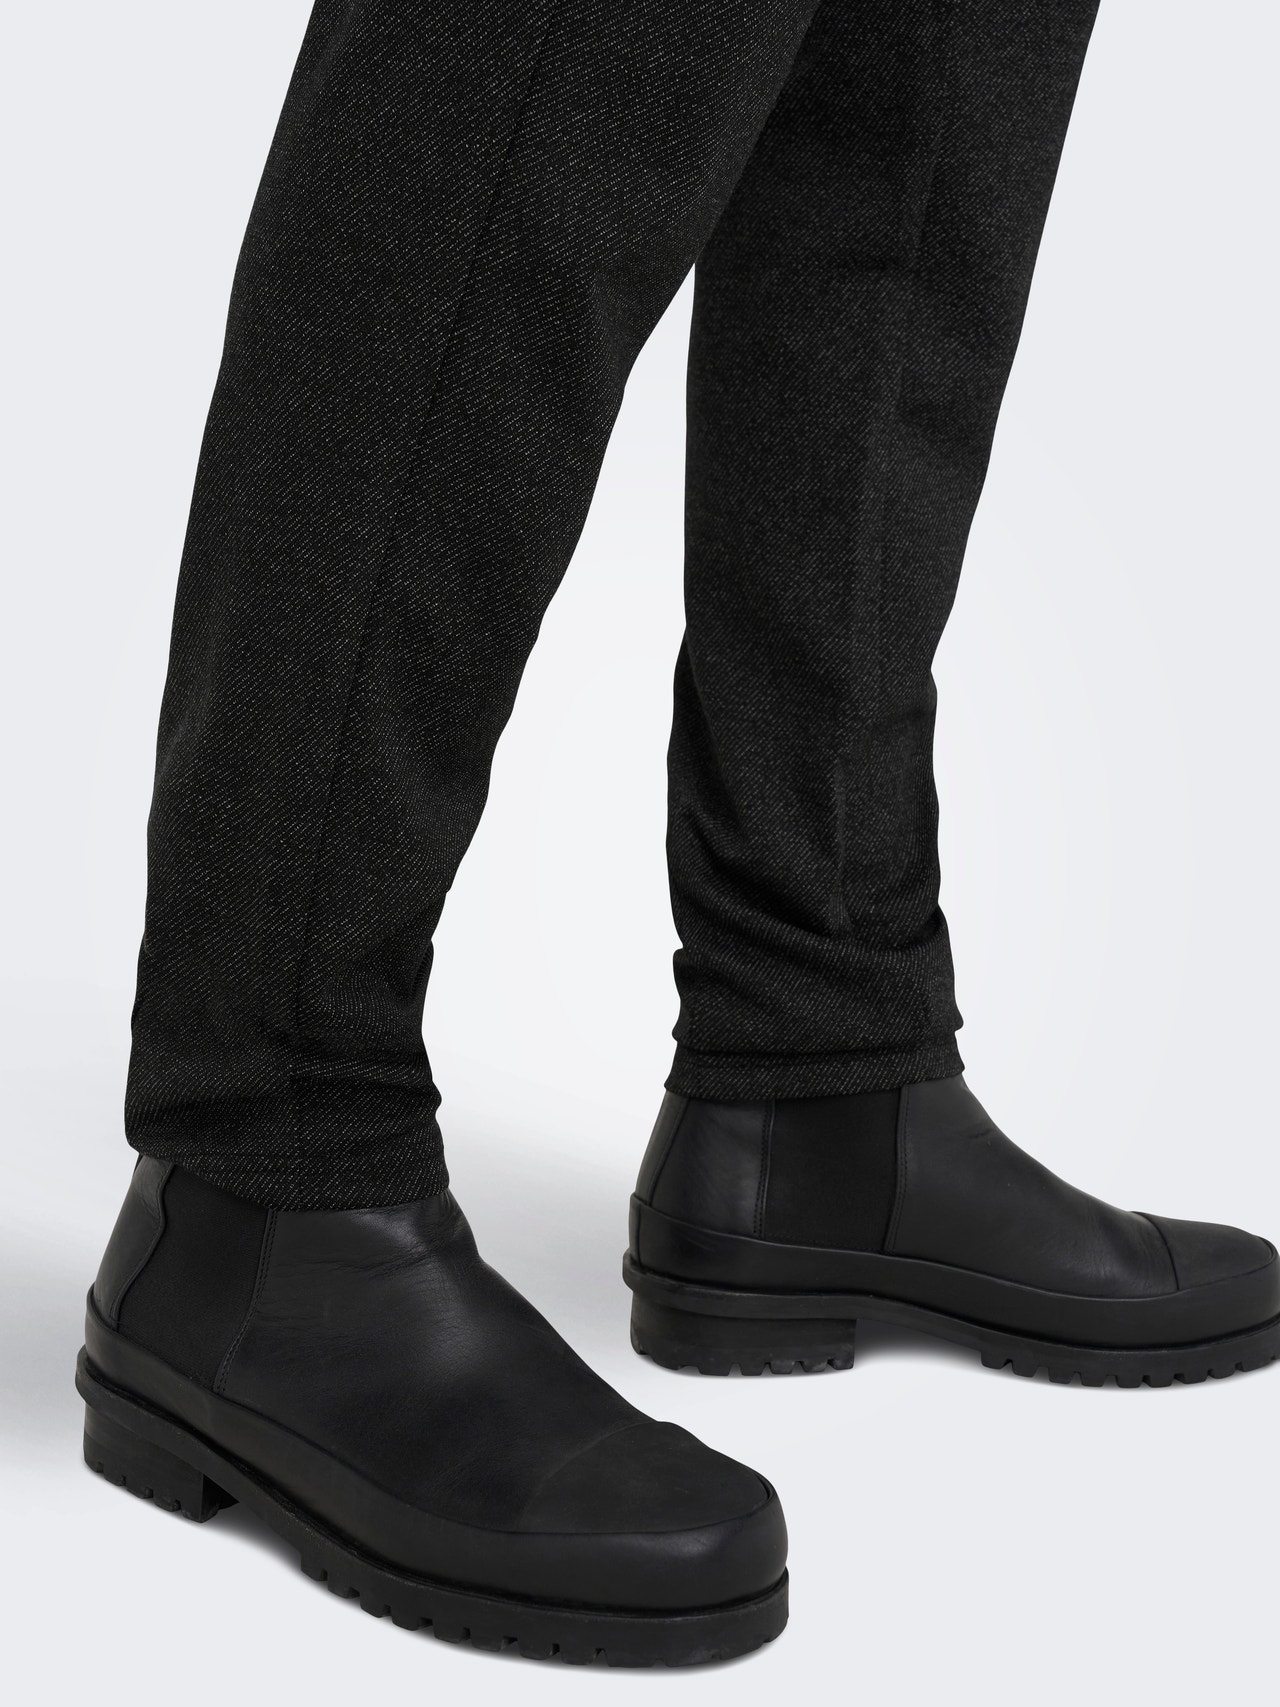 ONLY & SONS Tapered fit Chino's -Black - 22023496